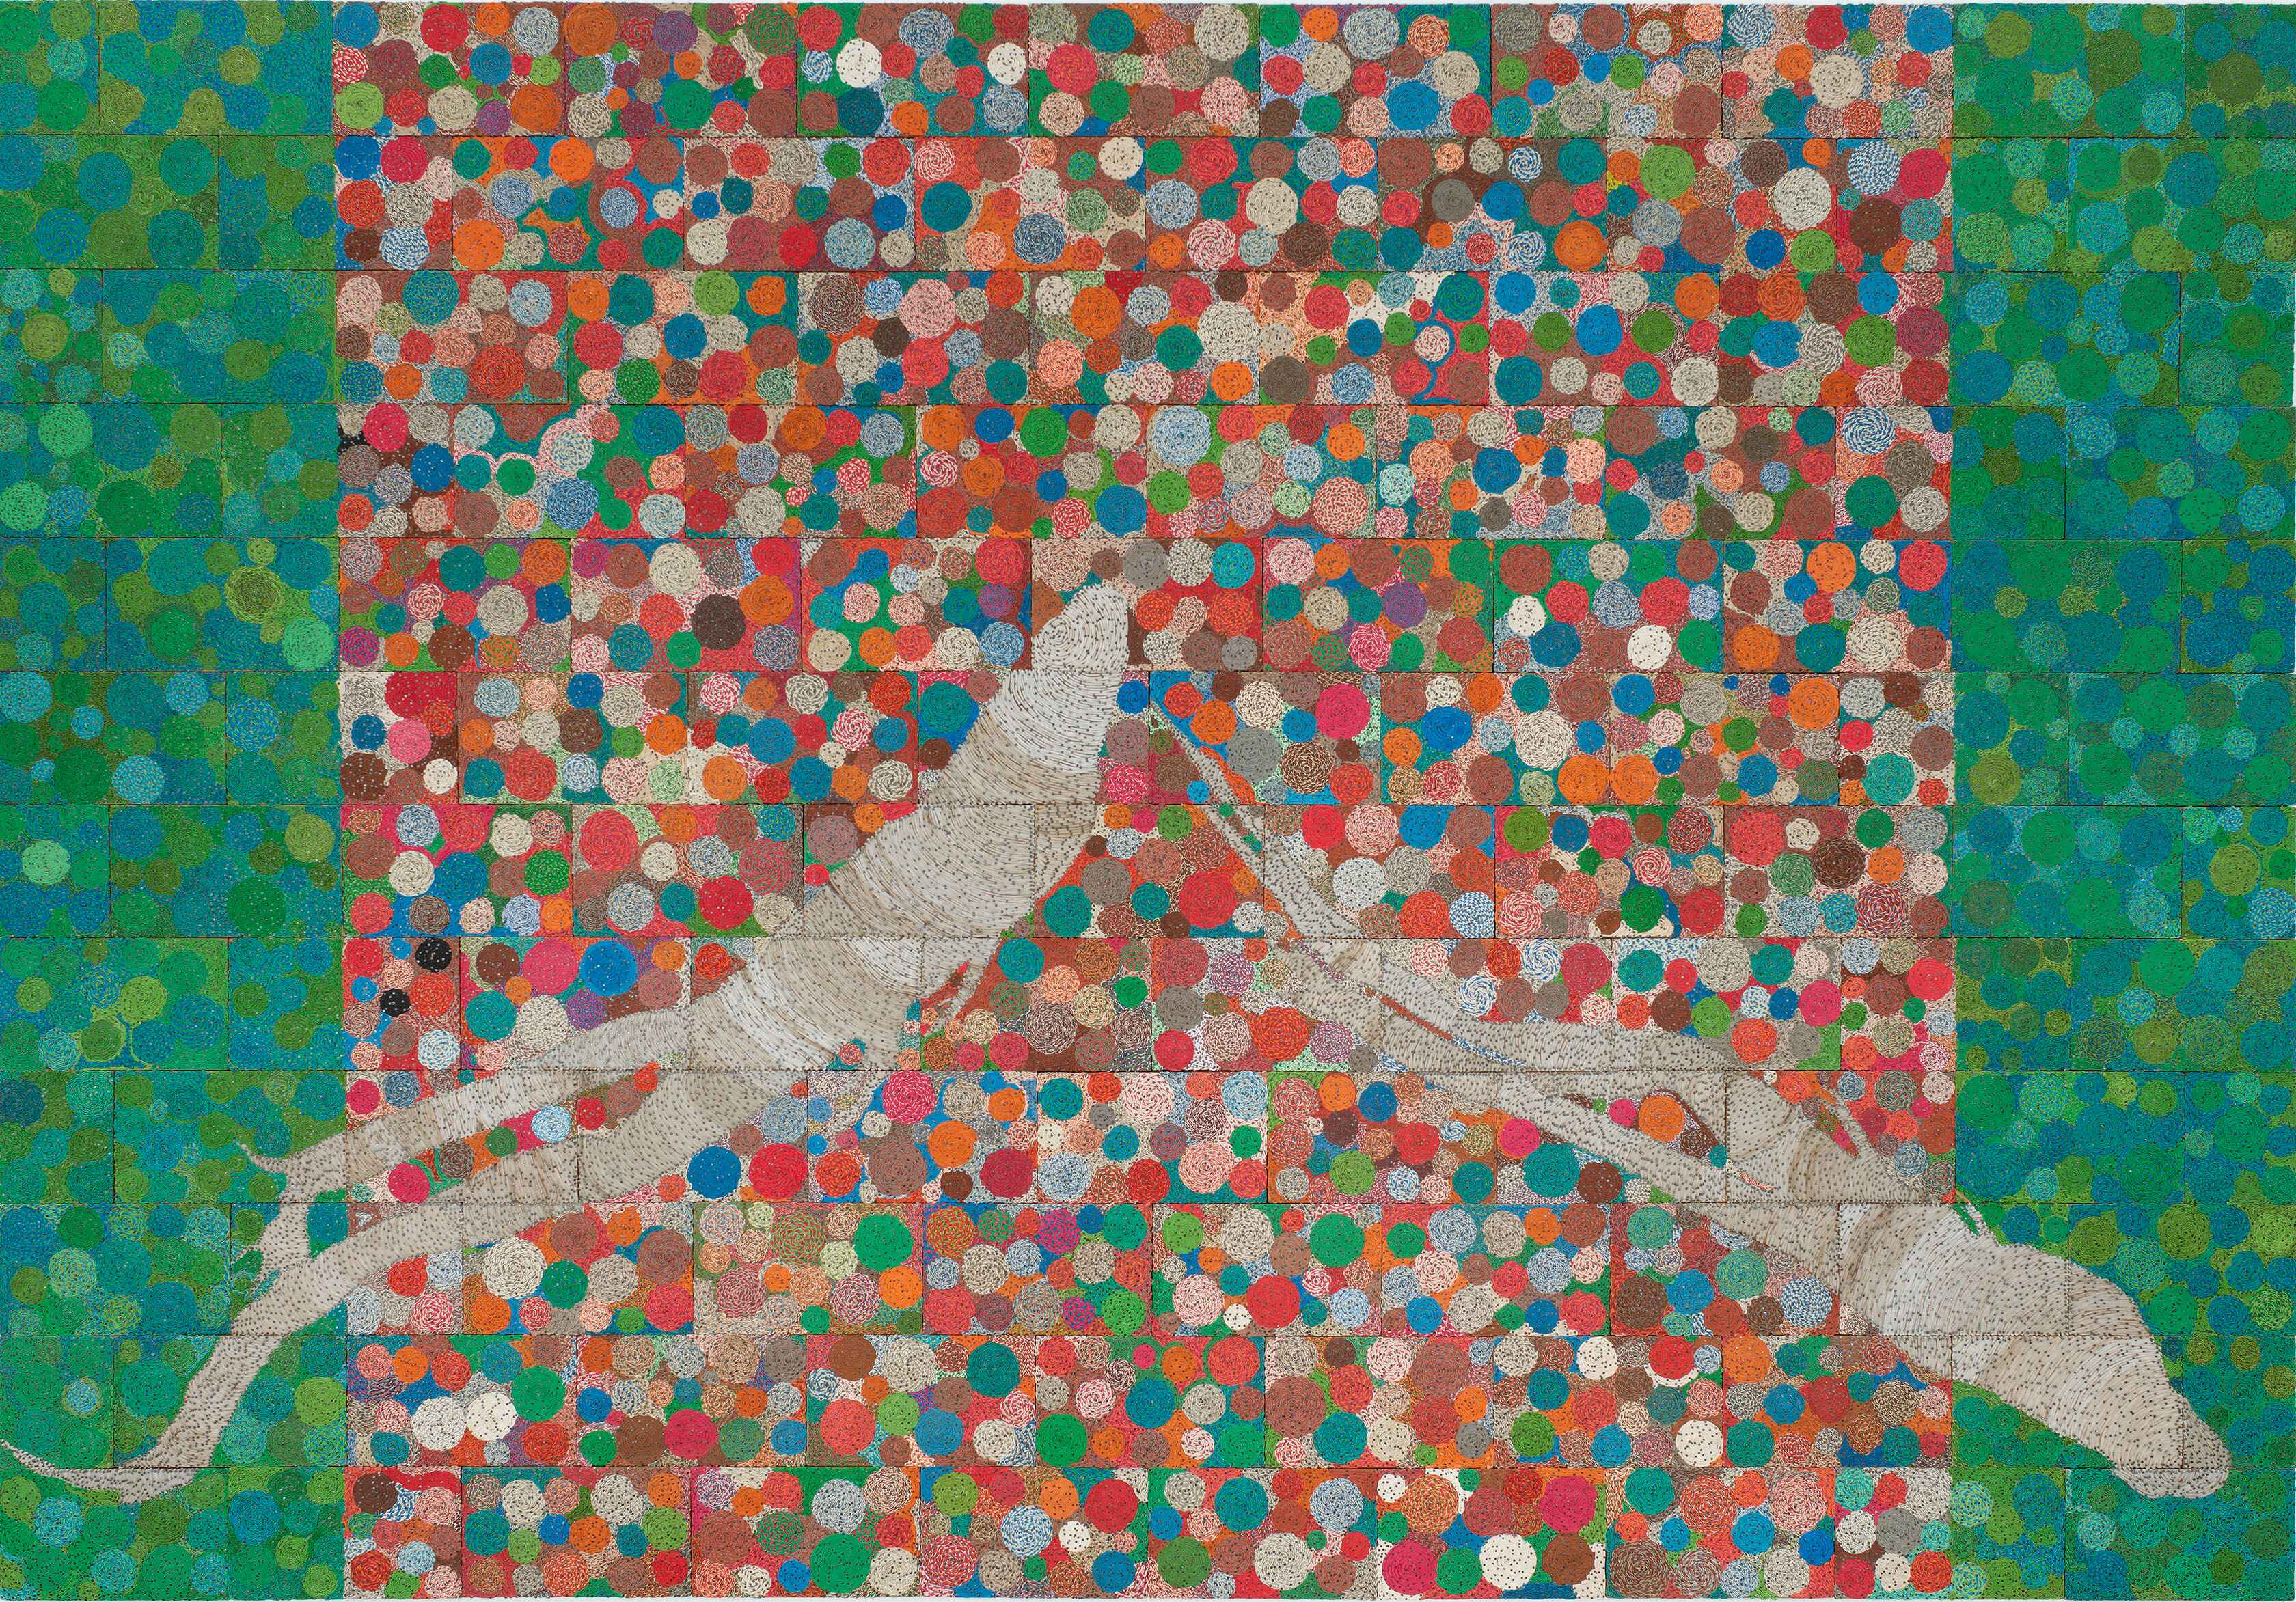 Image shows an artwork titled Tightrope: Evolution (1), made by artist Elias Sime in 2017. It is made with reclaimed electrical wires on panel. Two white figures appear to be diving against a background of colourful, overlapping circles in colours of red, blue, orange, yellow and green. The background is made up of braided lengths of electrical wires, which have been nailed flat onto the surface with grey nails.